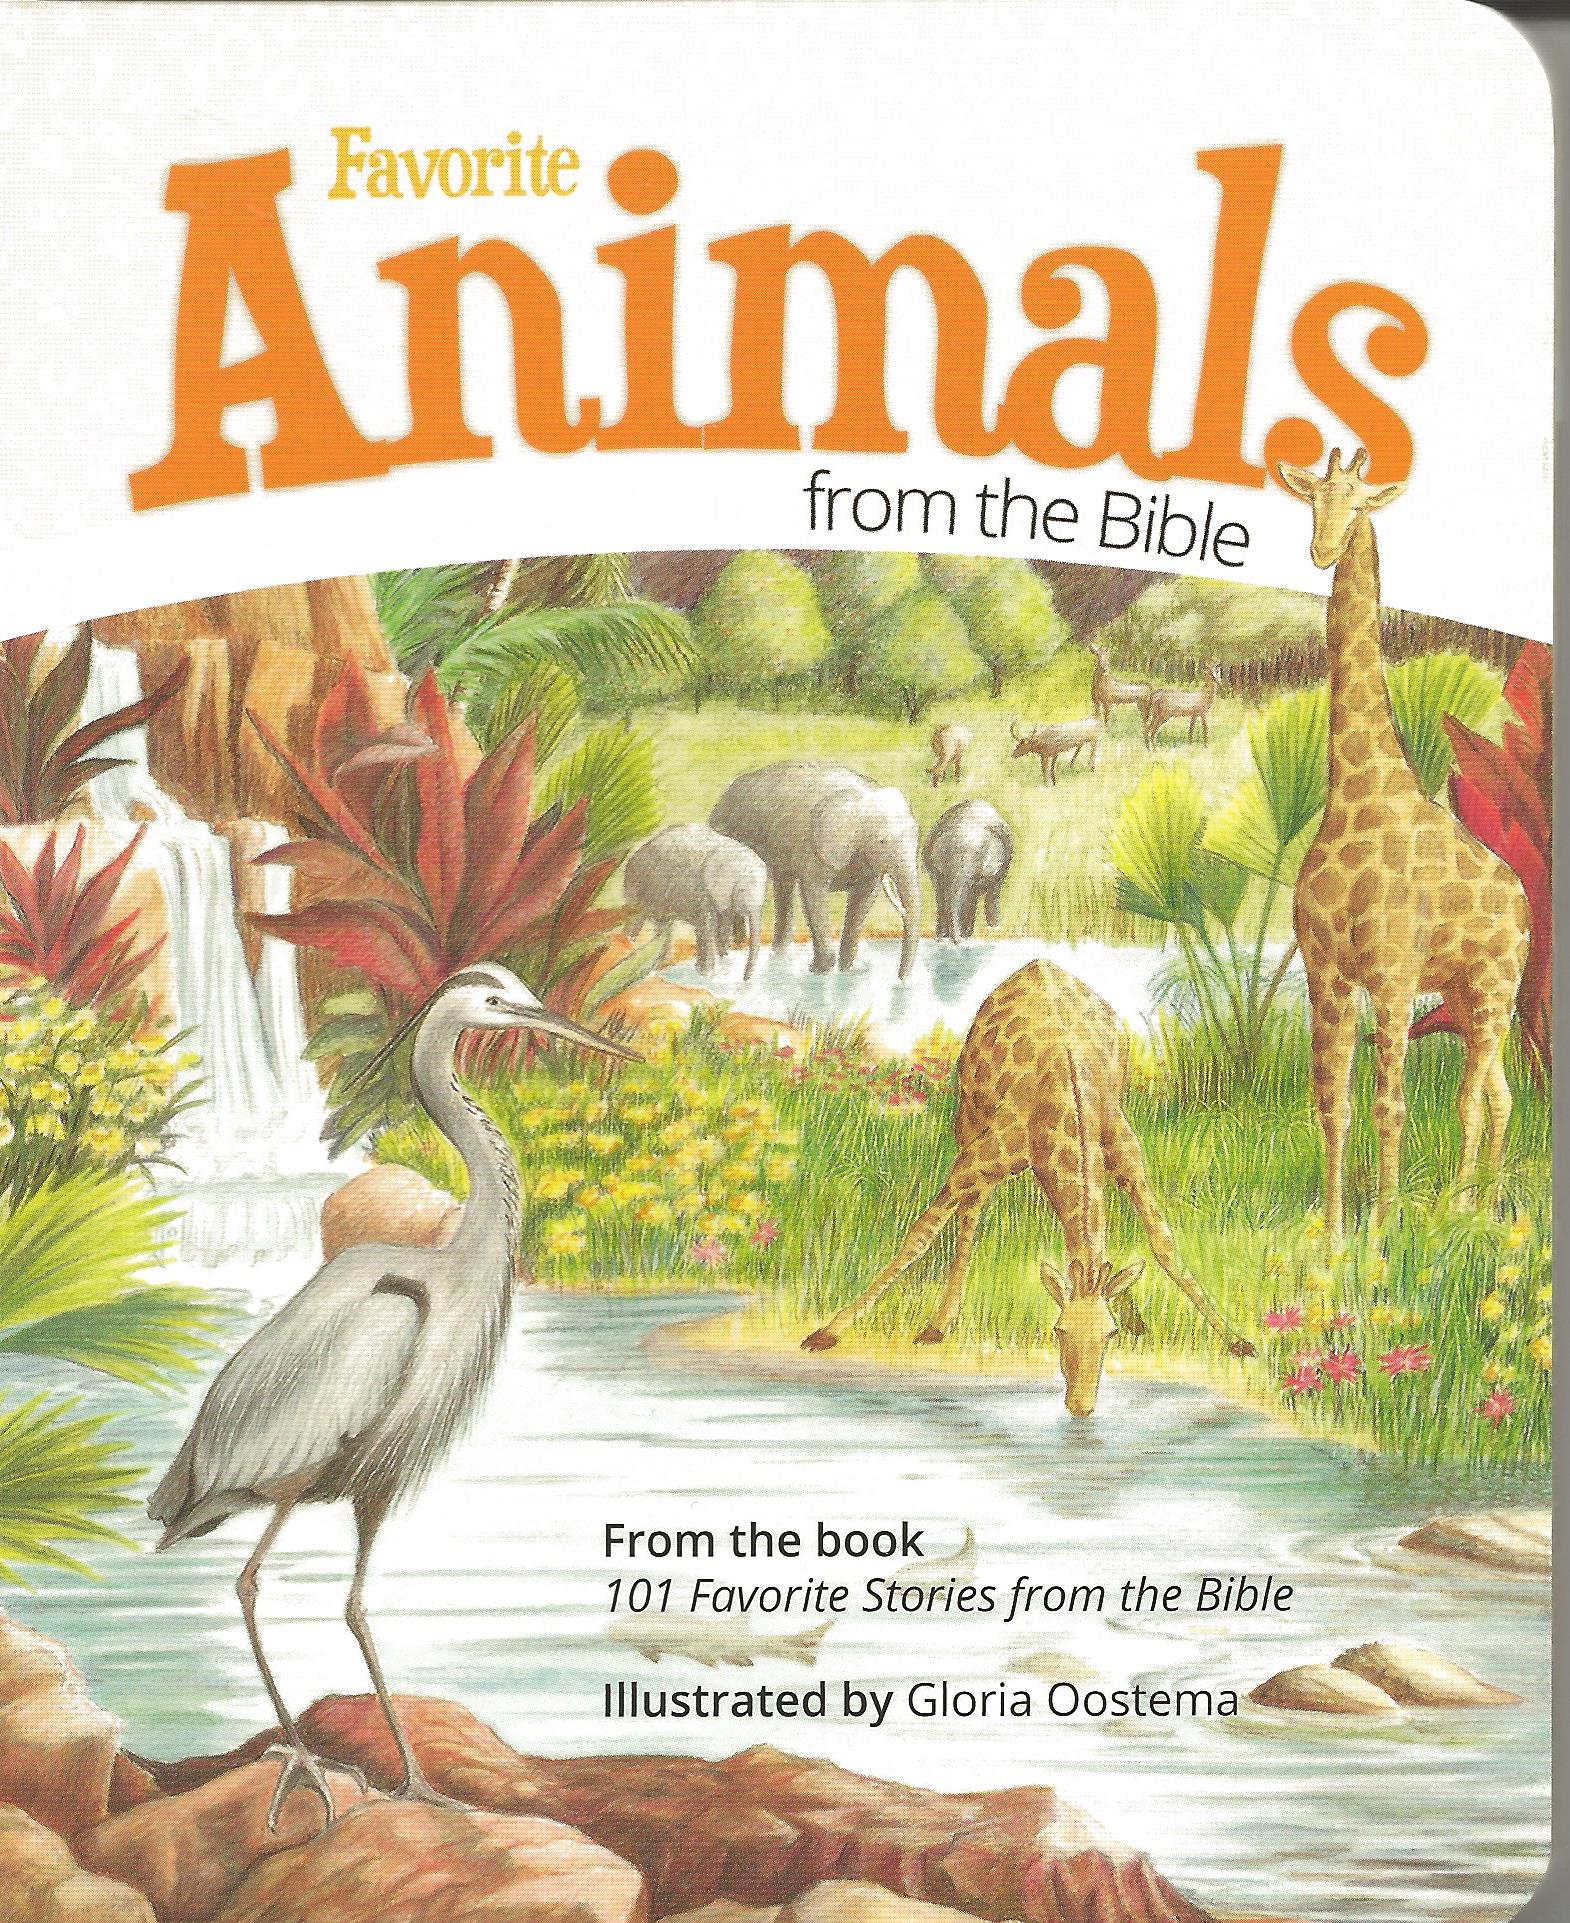 FAVORITE ANIMALS FROM THE BIBLE